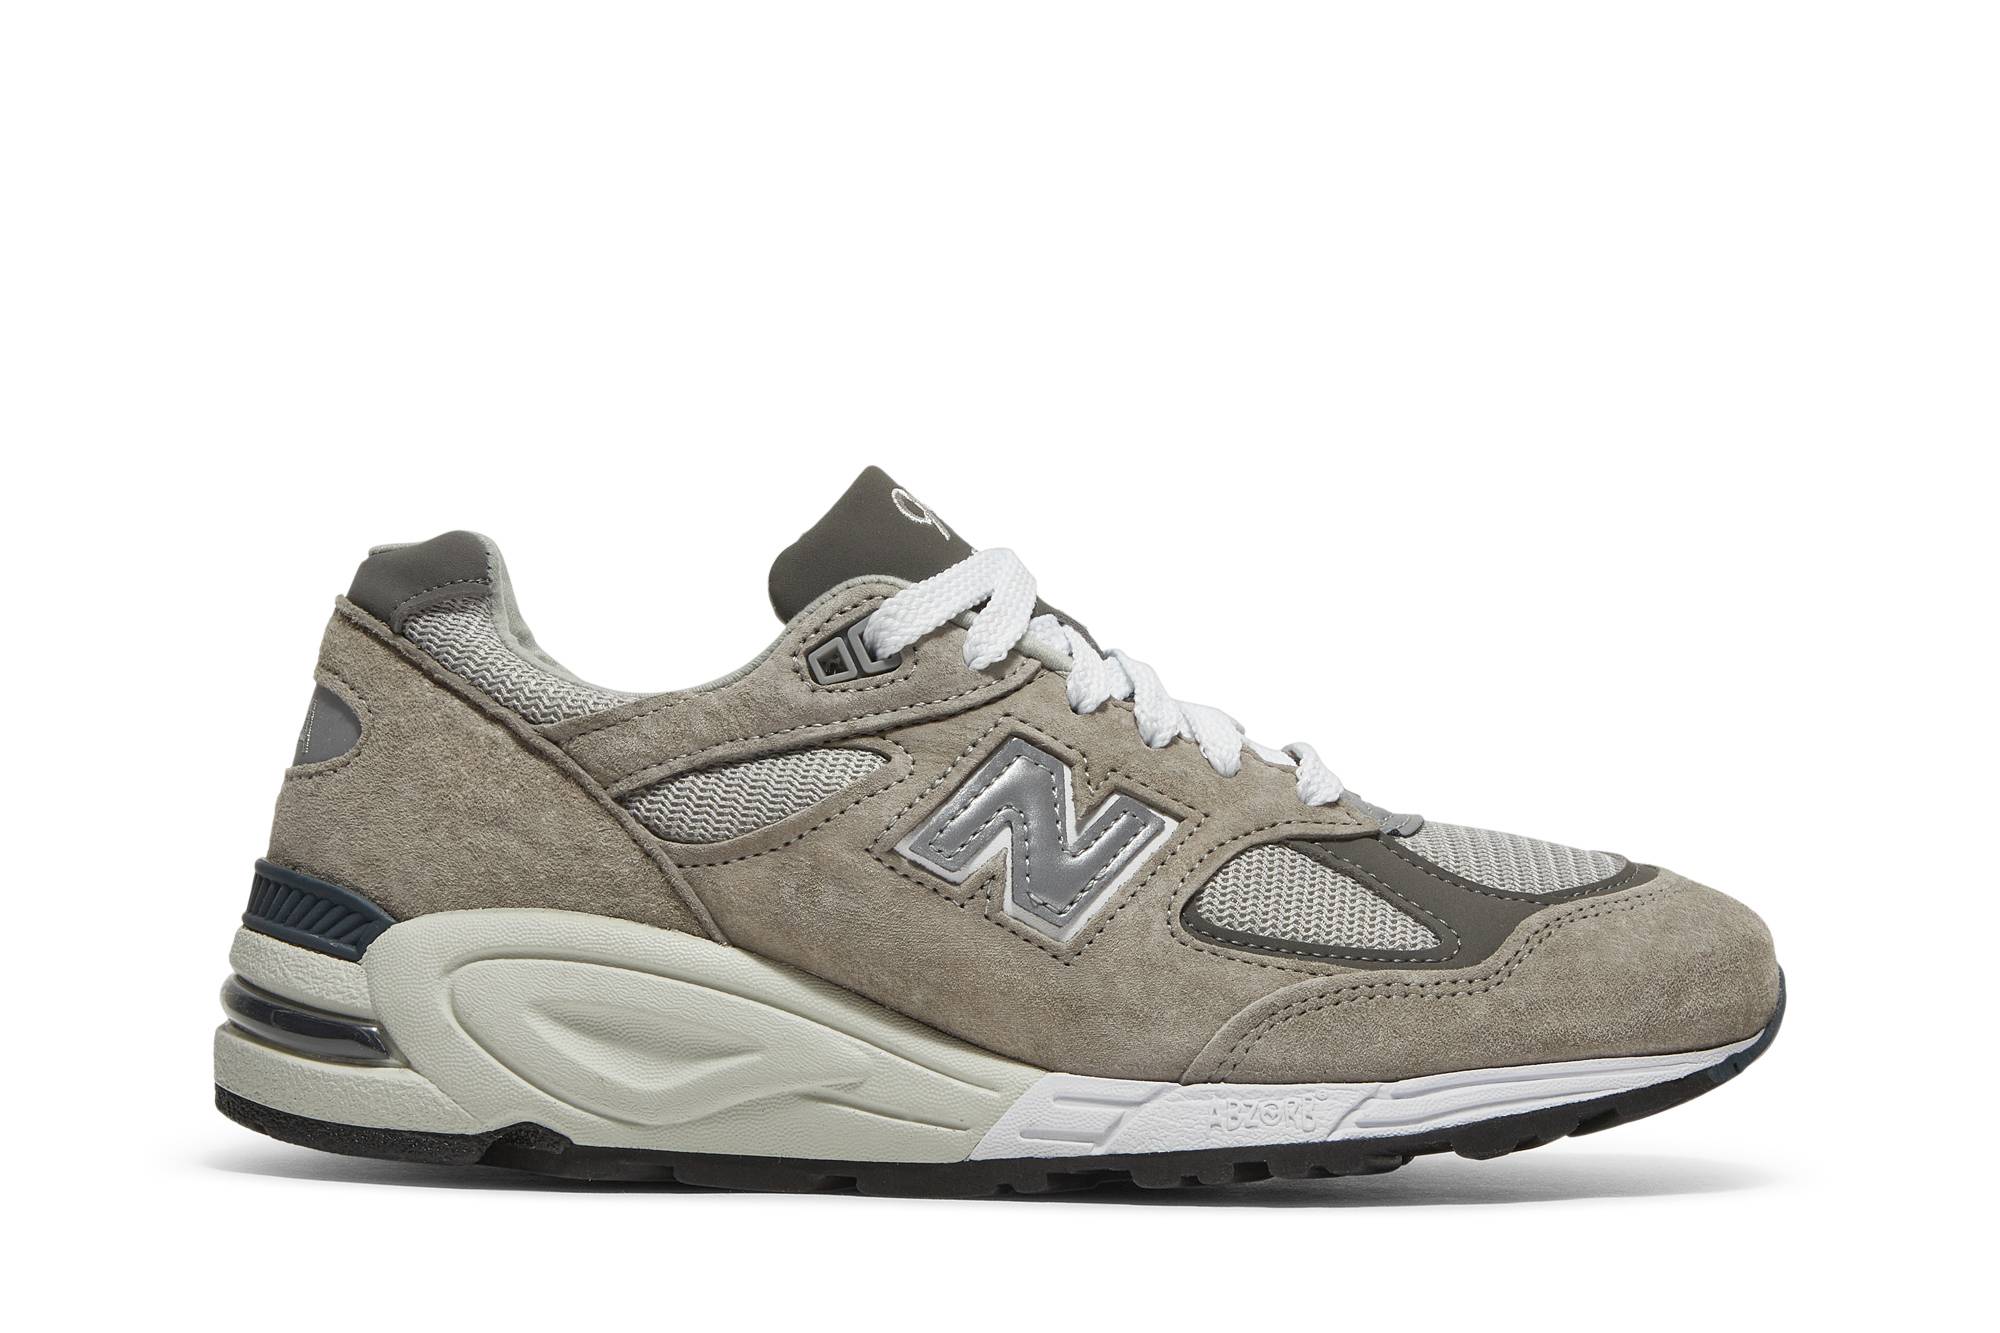 New Balance 990v2 Made in USA 'Grey' M990GY2 - M990GY2 - Novelship